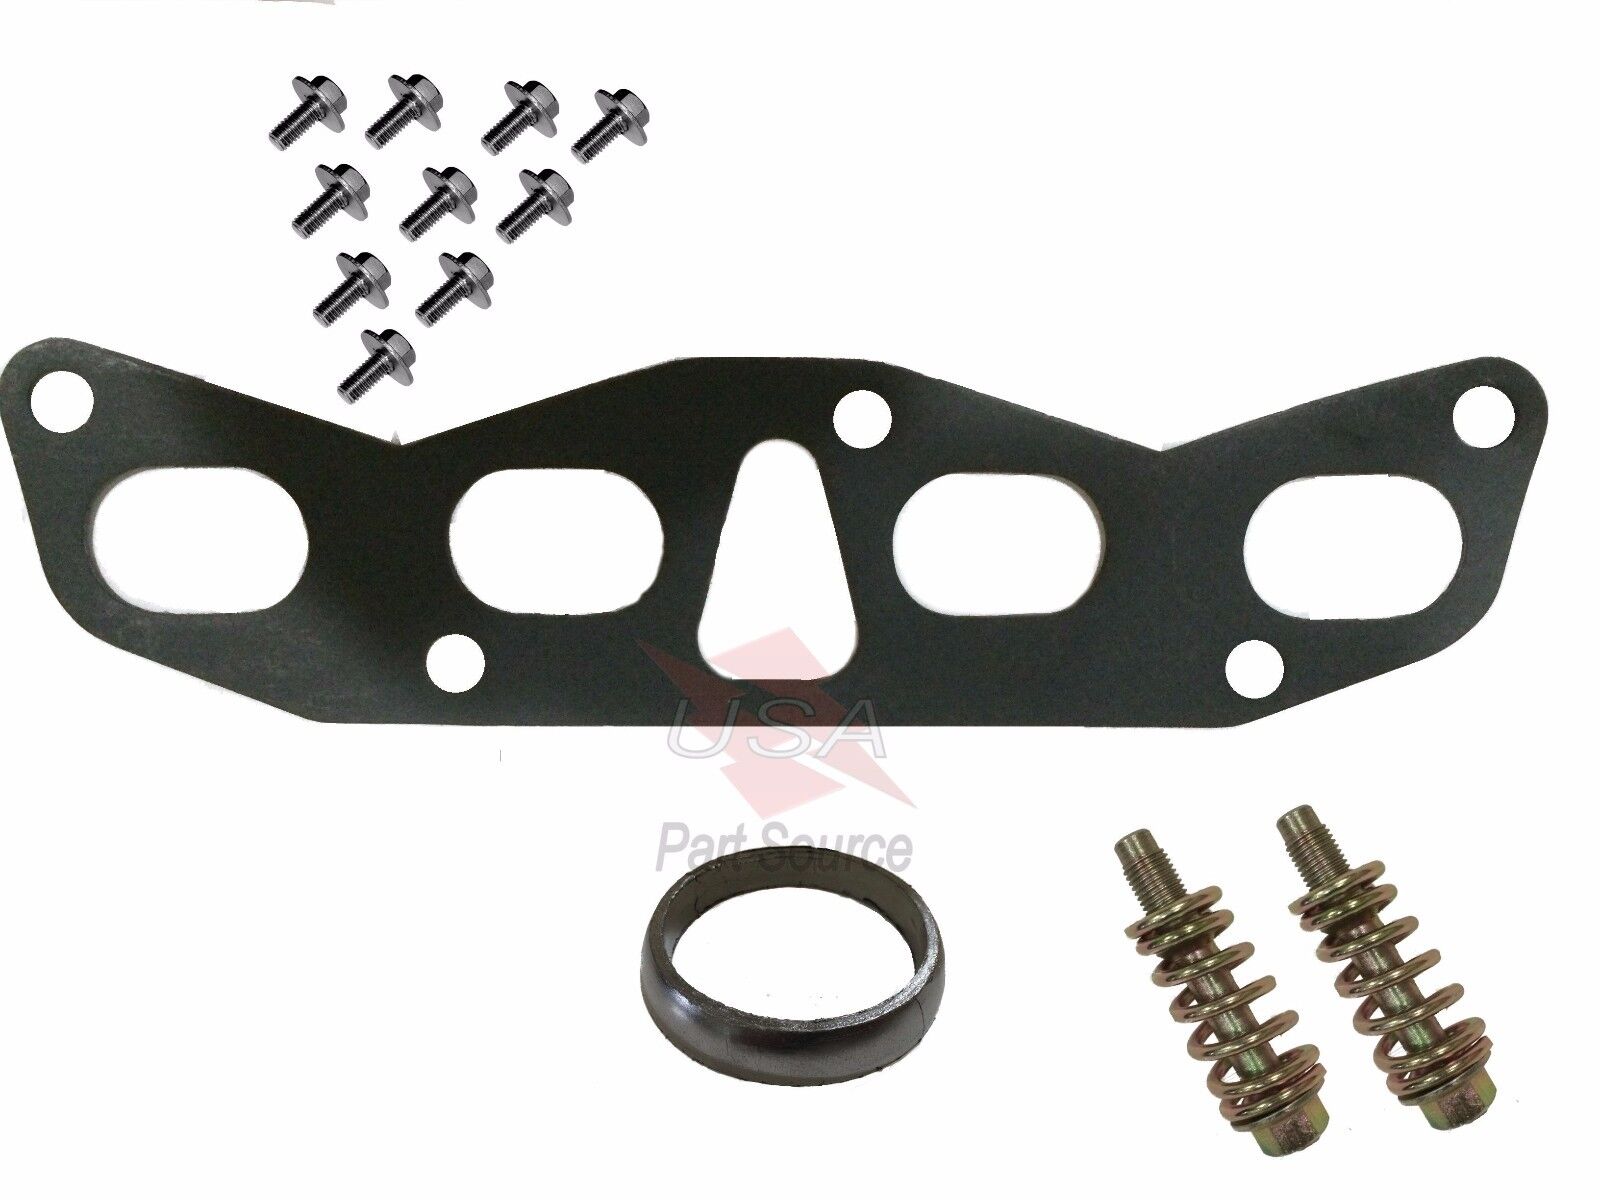 New Exhaust Manifold Gaskets Flange Down Pipe For 2002-2006 Nissan Altima 2.5L  